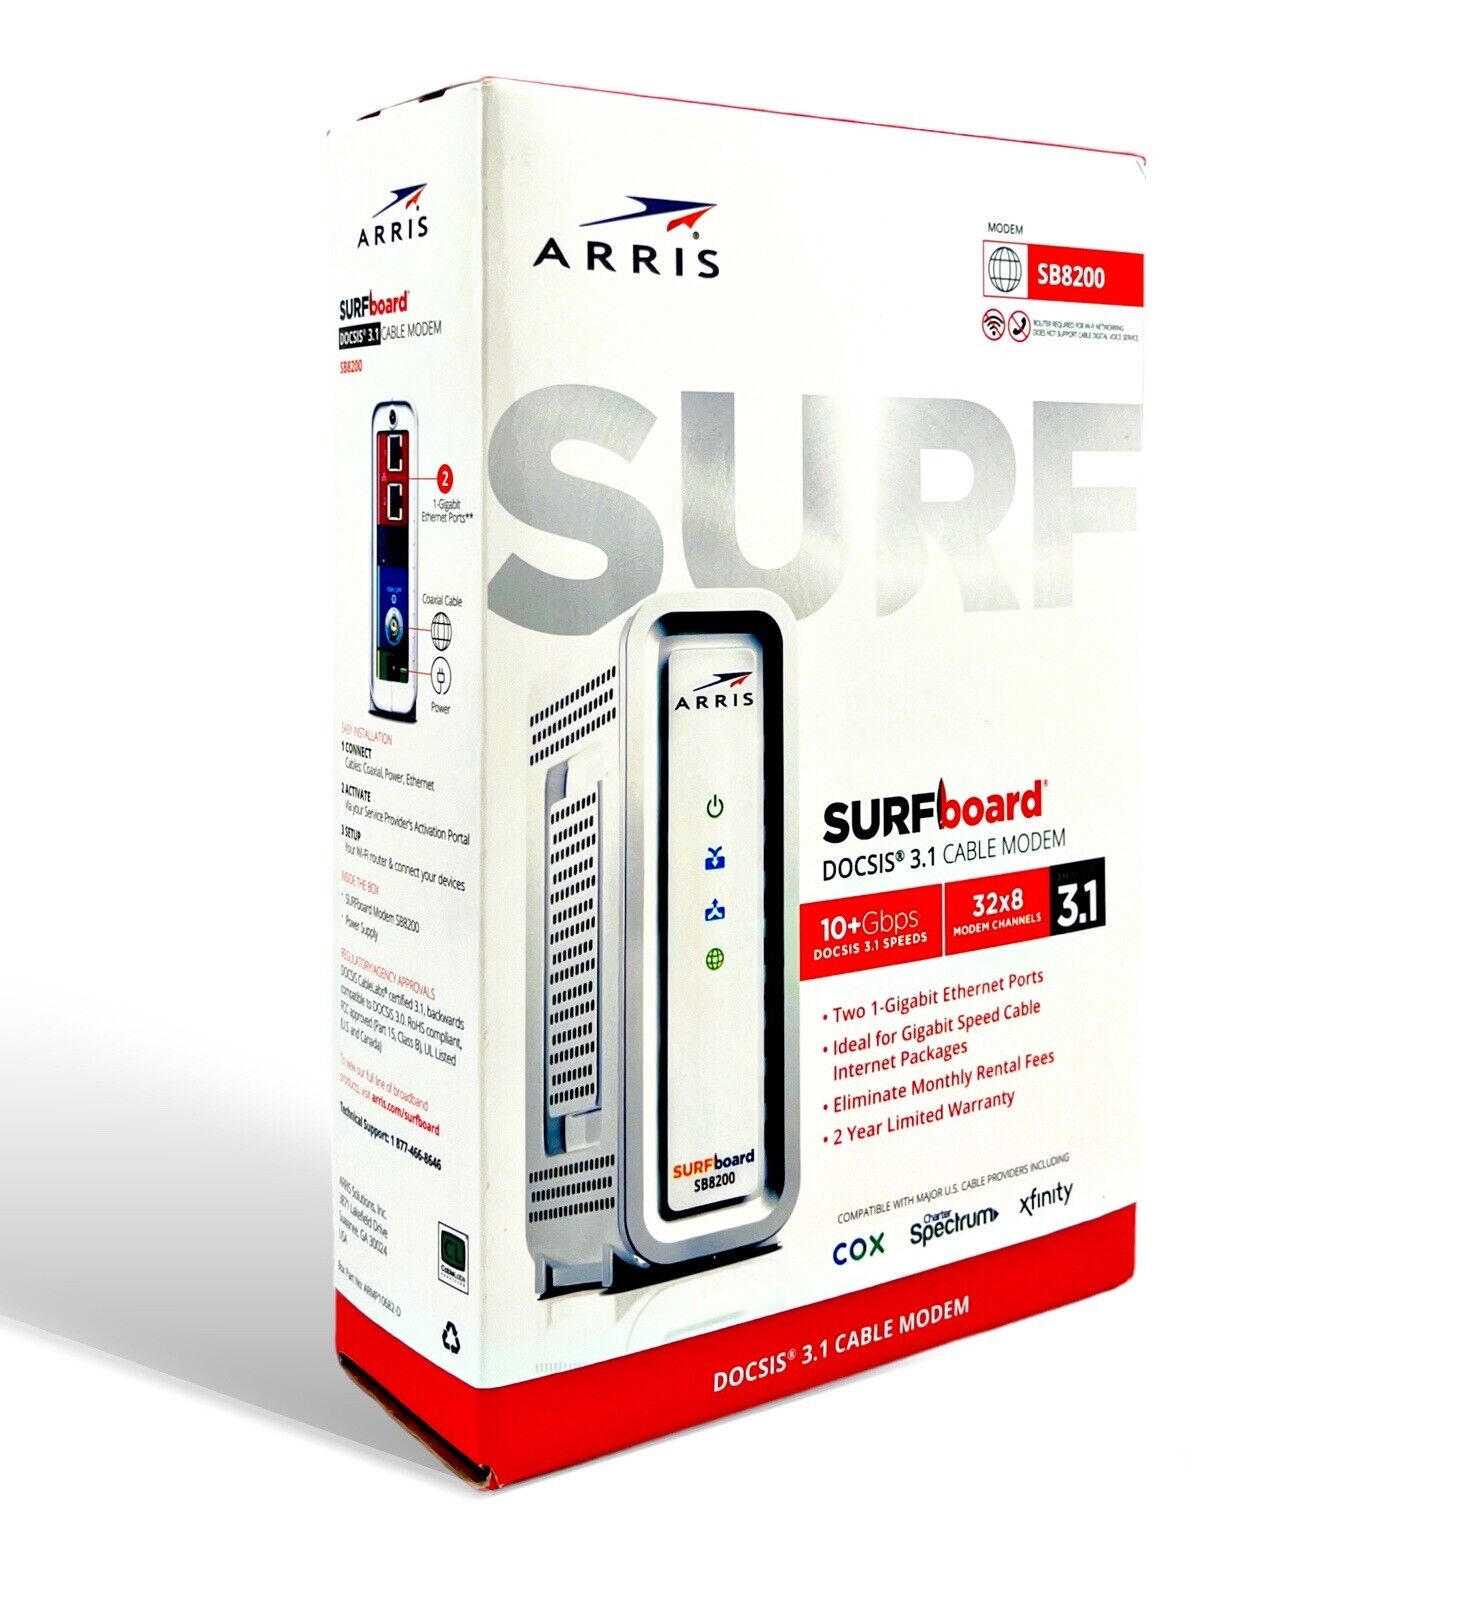 ARRIS SURFboard SB8200 DOCSIS 3.1 10 Gbps Cable Internet Modem - NEW, Open Box